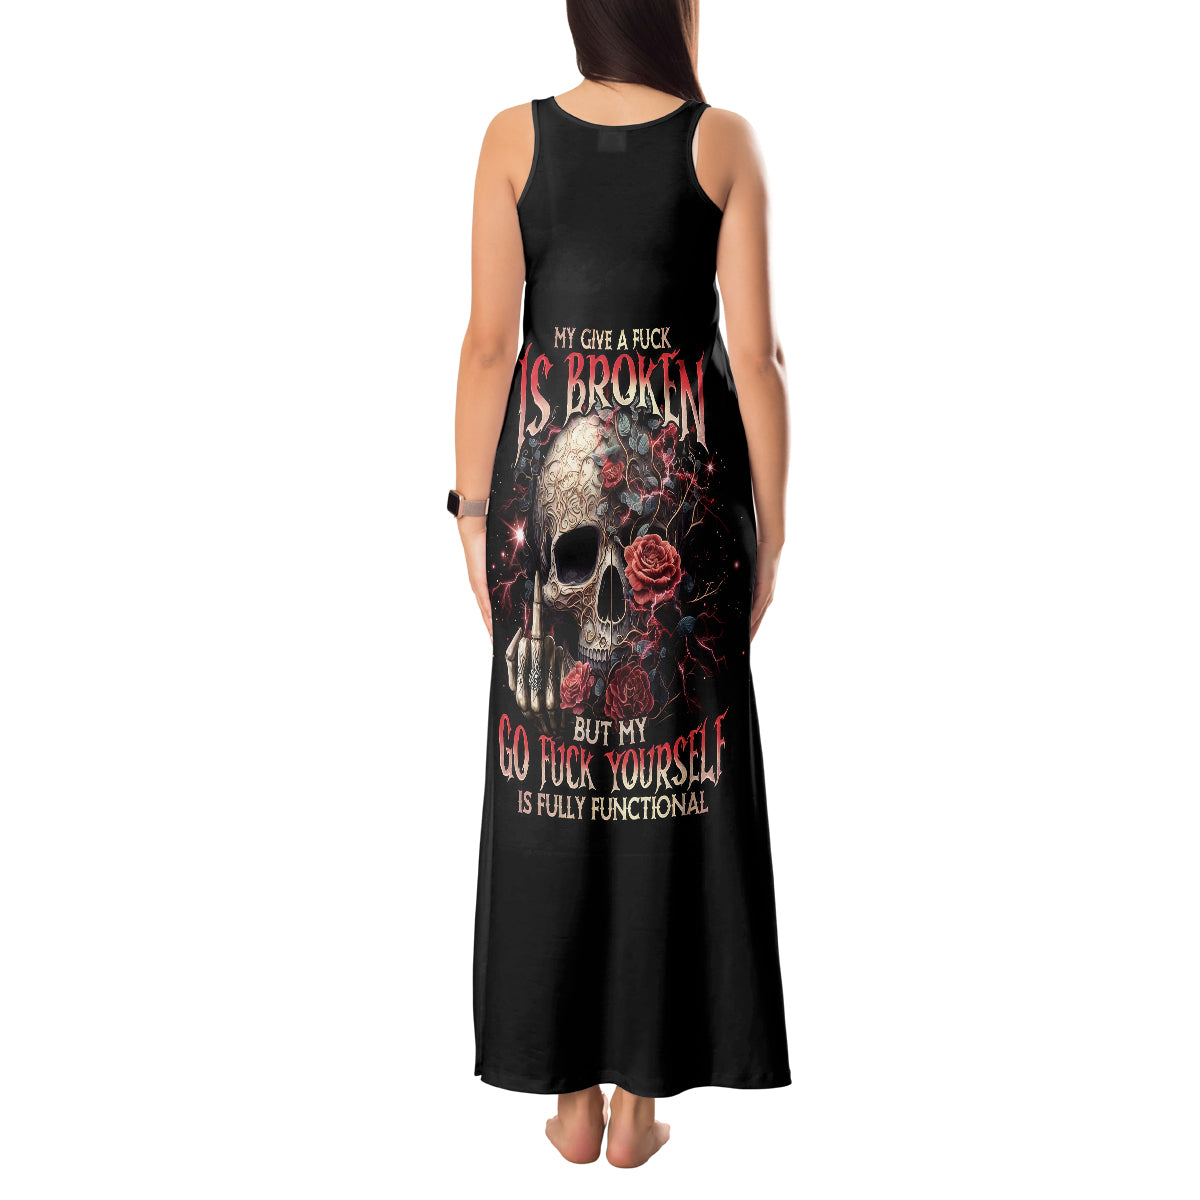 rose-skull-tank-maxi-dress-my-give-a-fuck-is-broken-but-my-go-fuck-yourself-is-functional